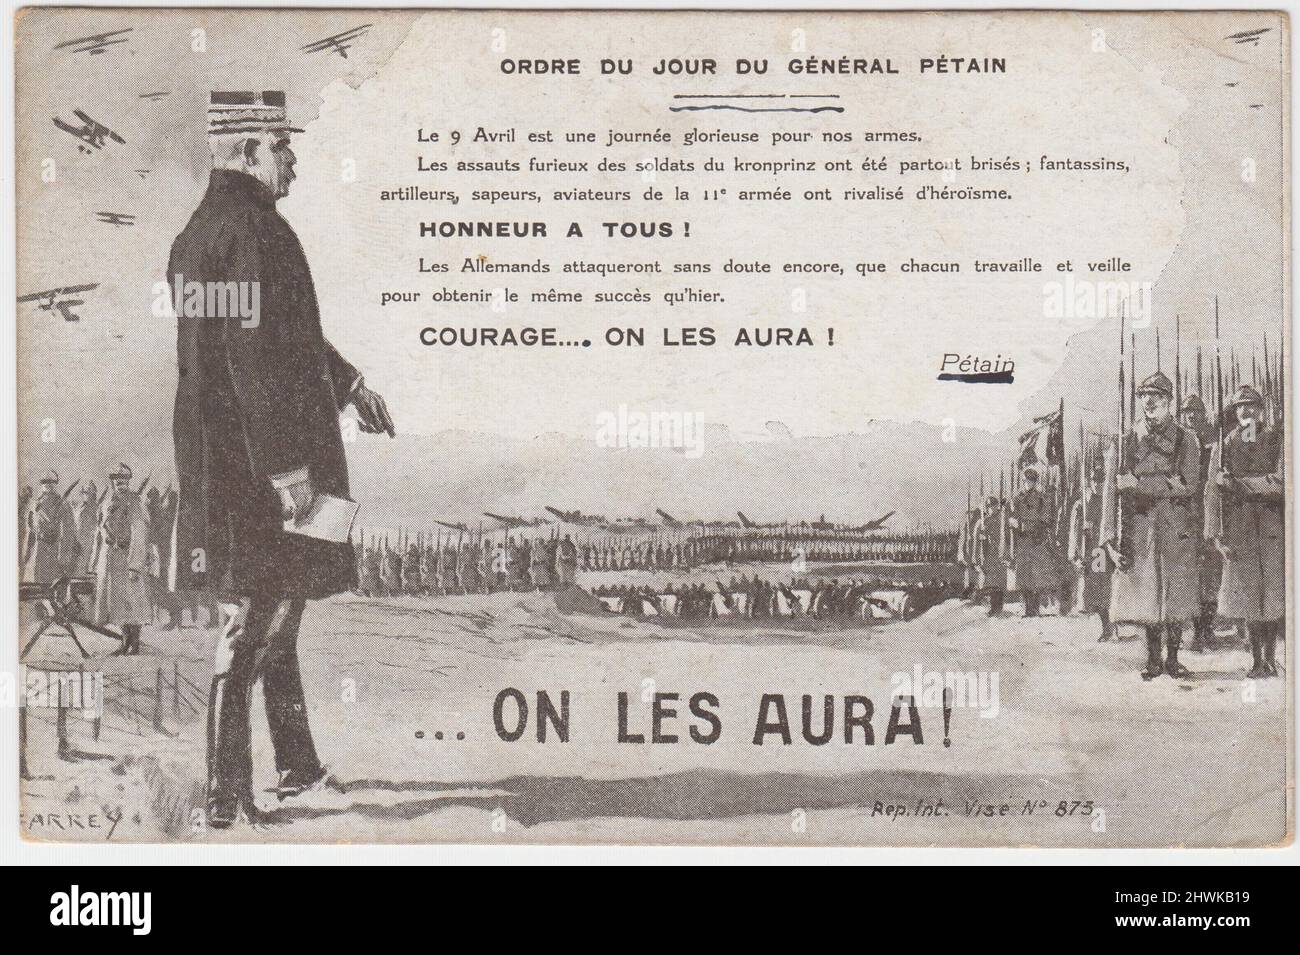 'Ordre du Jour du Général Pétain' / 'General Pétain's order of the day': French First World War postcard showing General Pétain addressing lines of French soldiers, with aeroplanes circling in the sky. Stock Photo